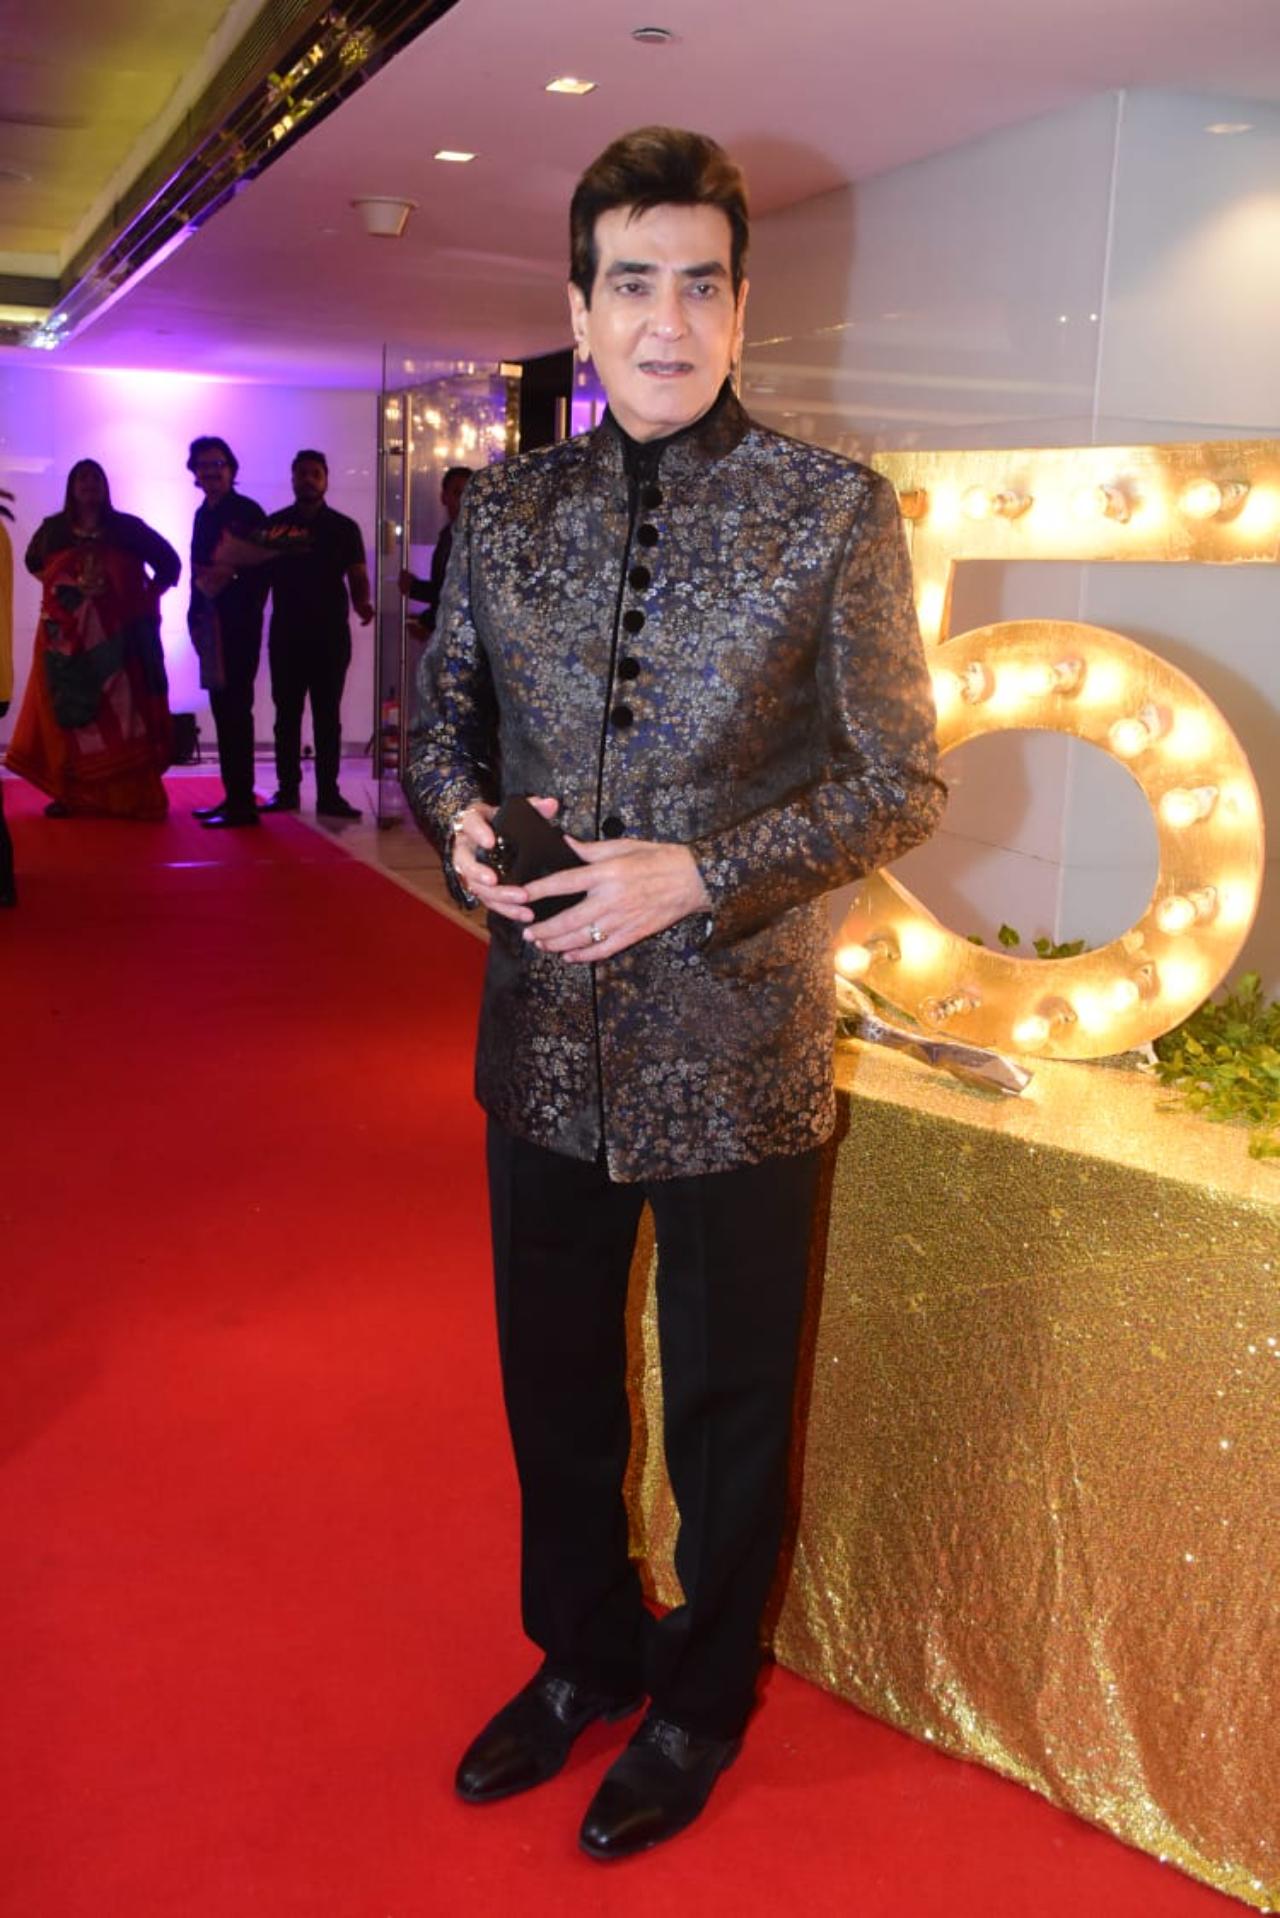 Celebrated veteran actor Jeetendra also attended this high-profile event